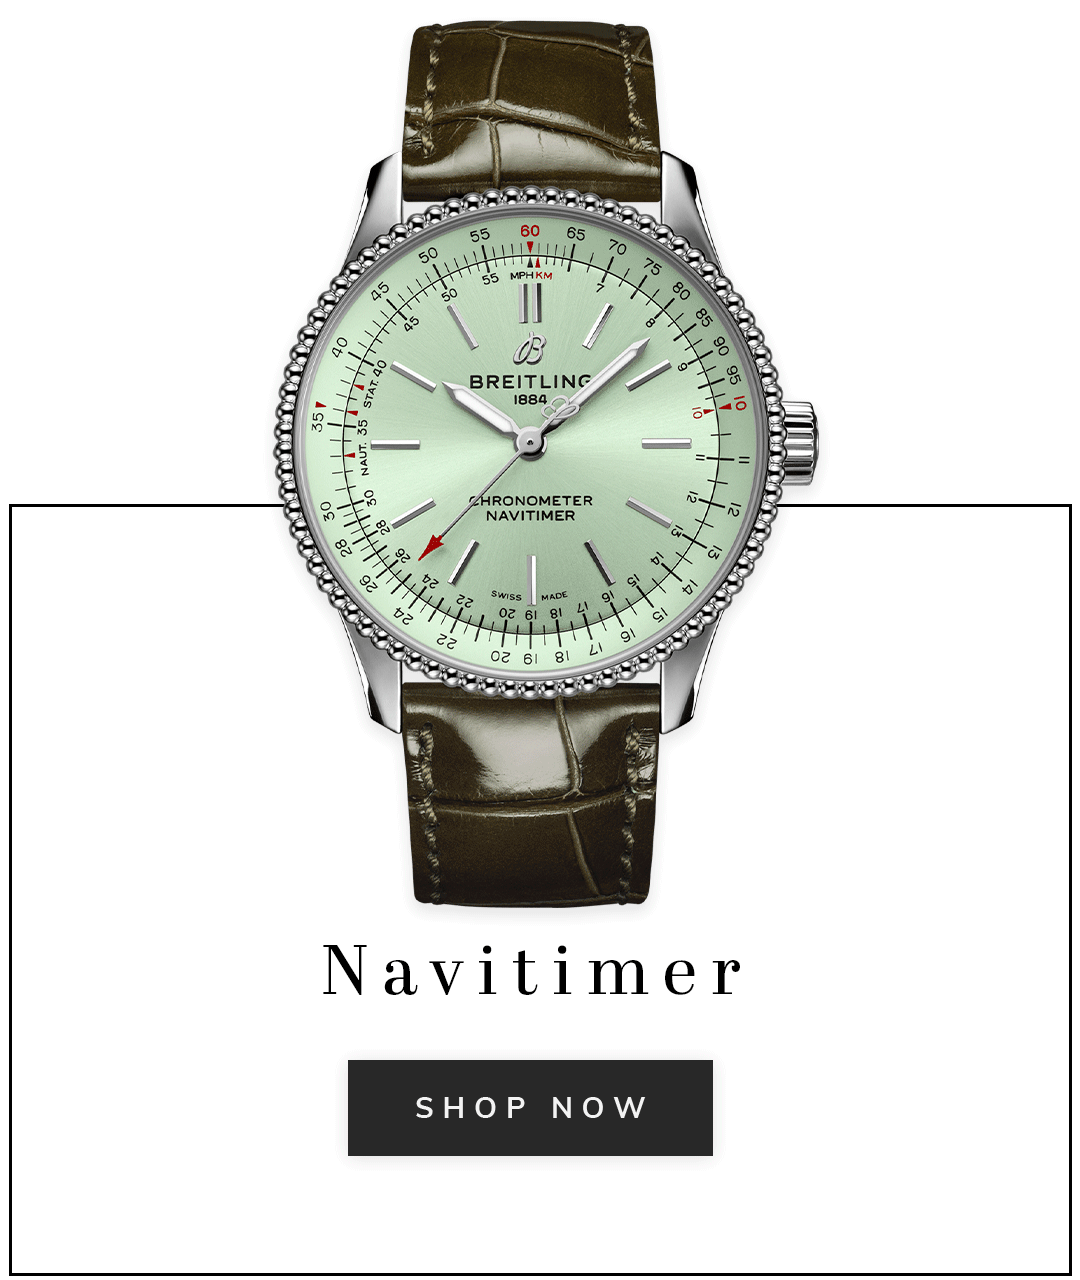 A breitling Navitimer watch with text shop now